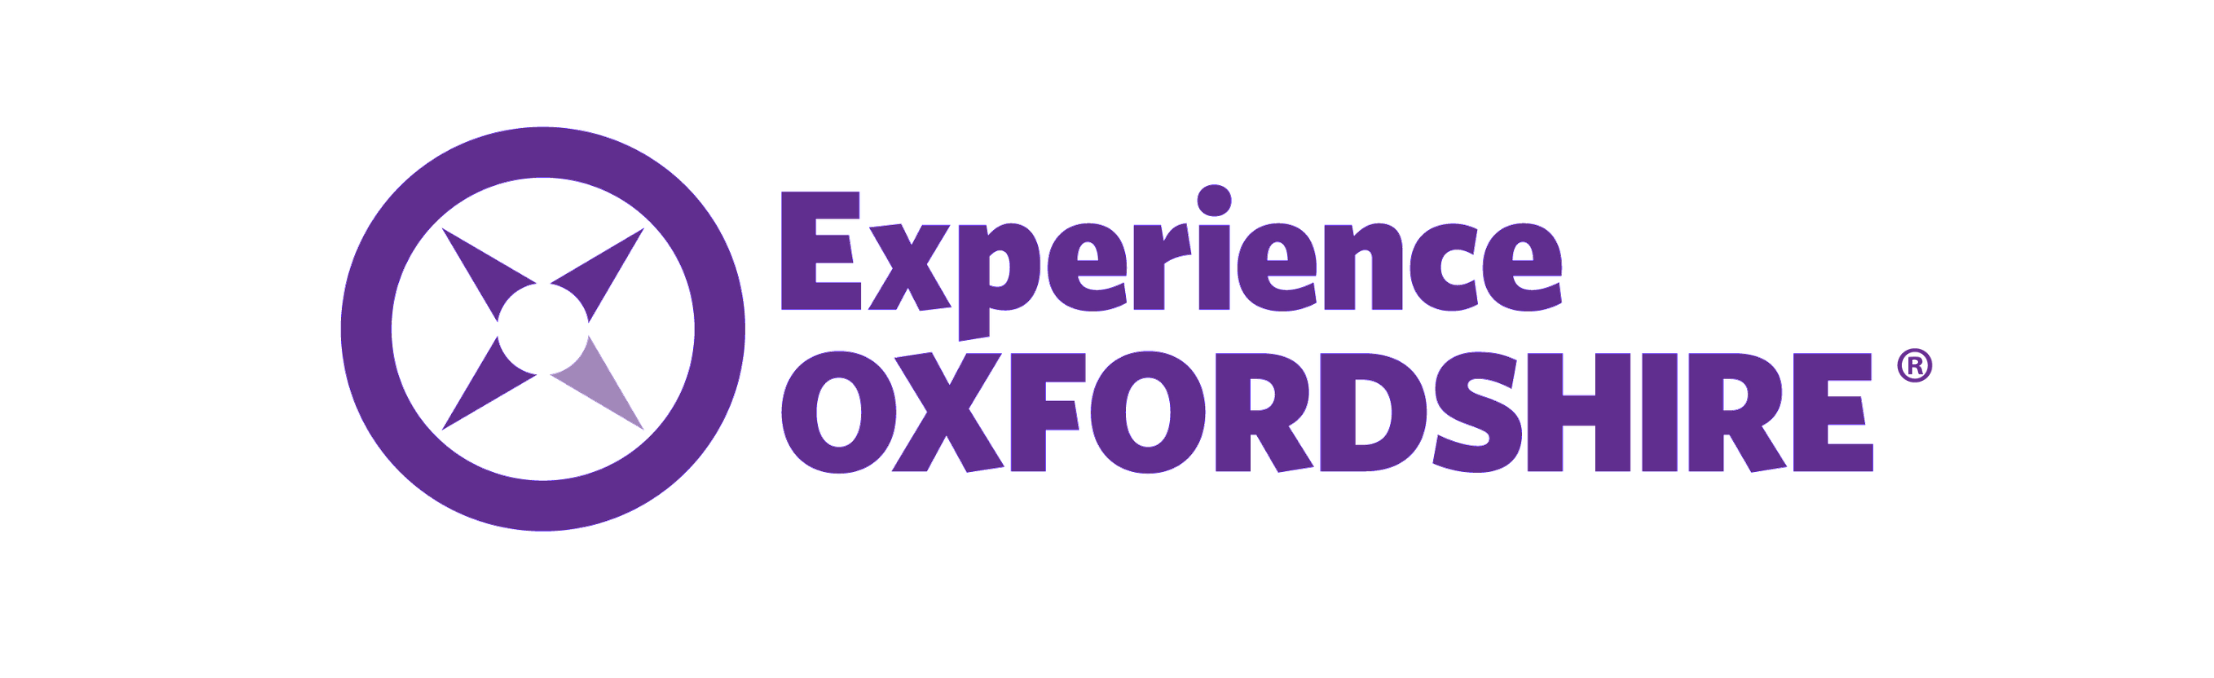 Experience Oxfordshire Banner